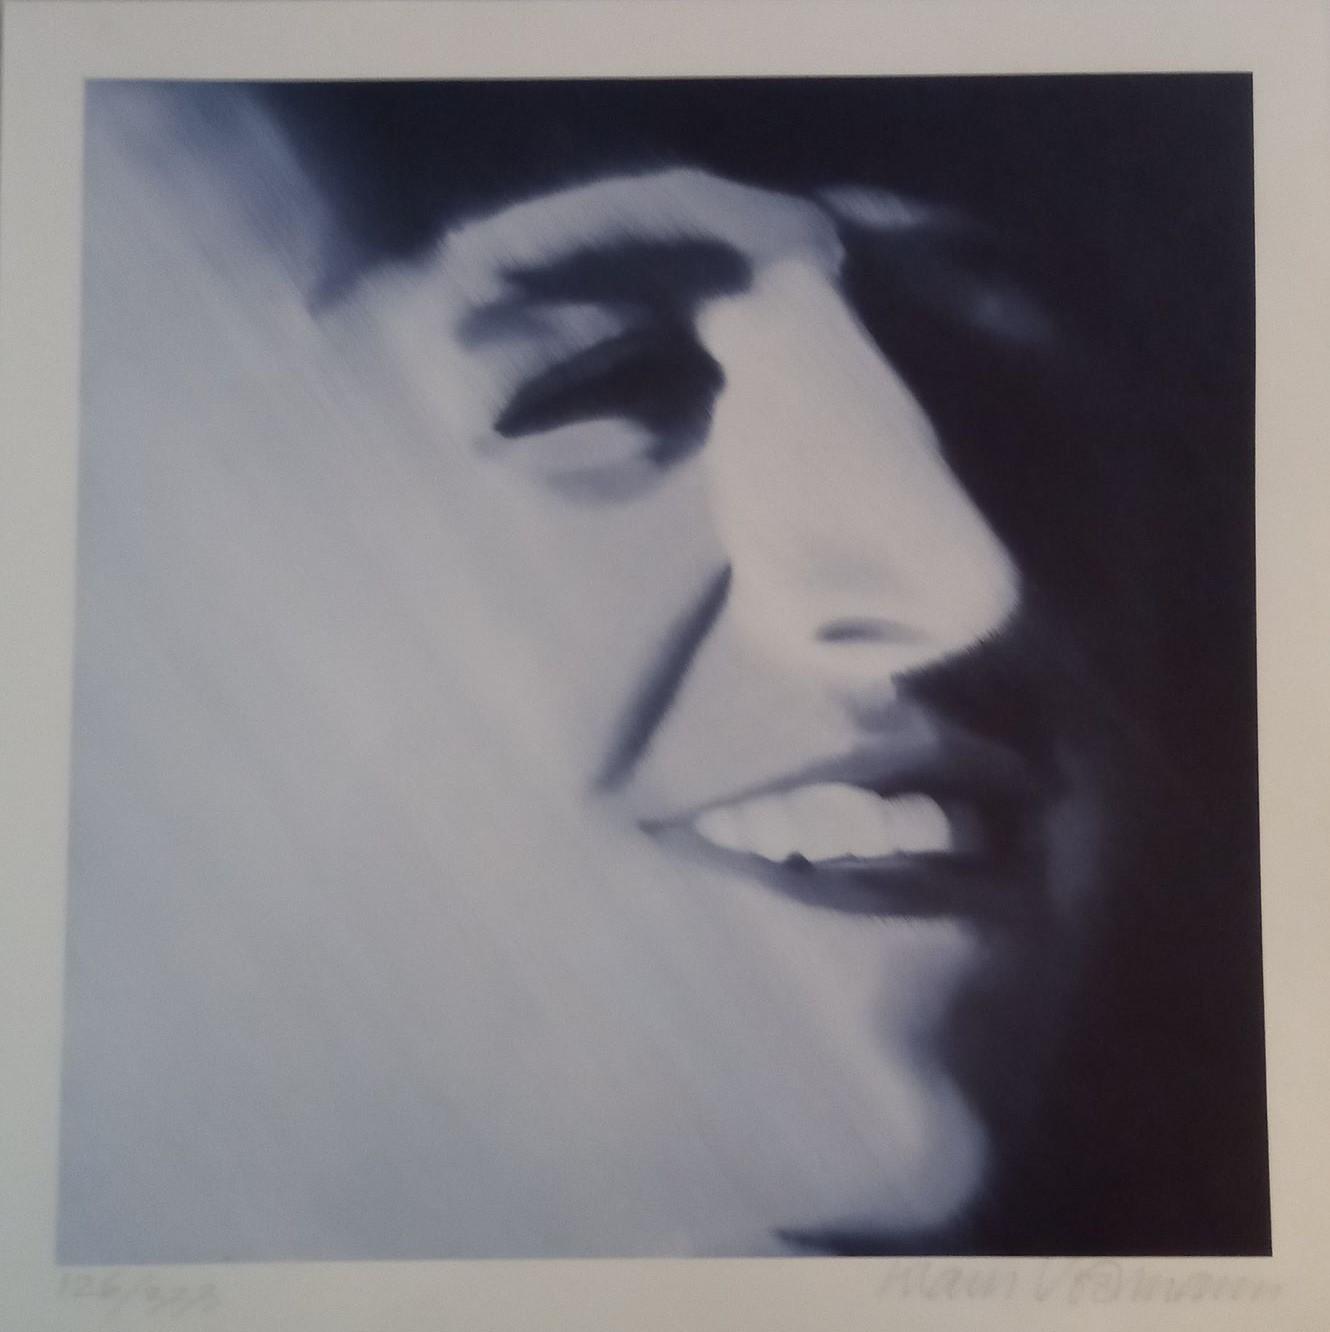 Ringo Starr limited edition print 126/333 by Klaus Voormann. Size Approx. 13 x 13 inches